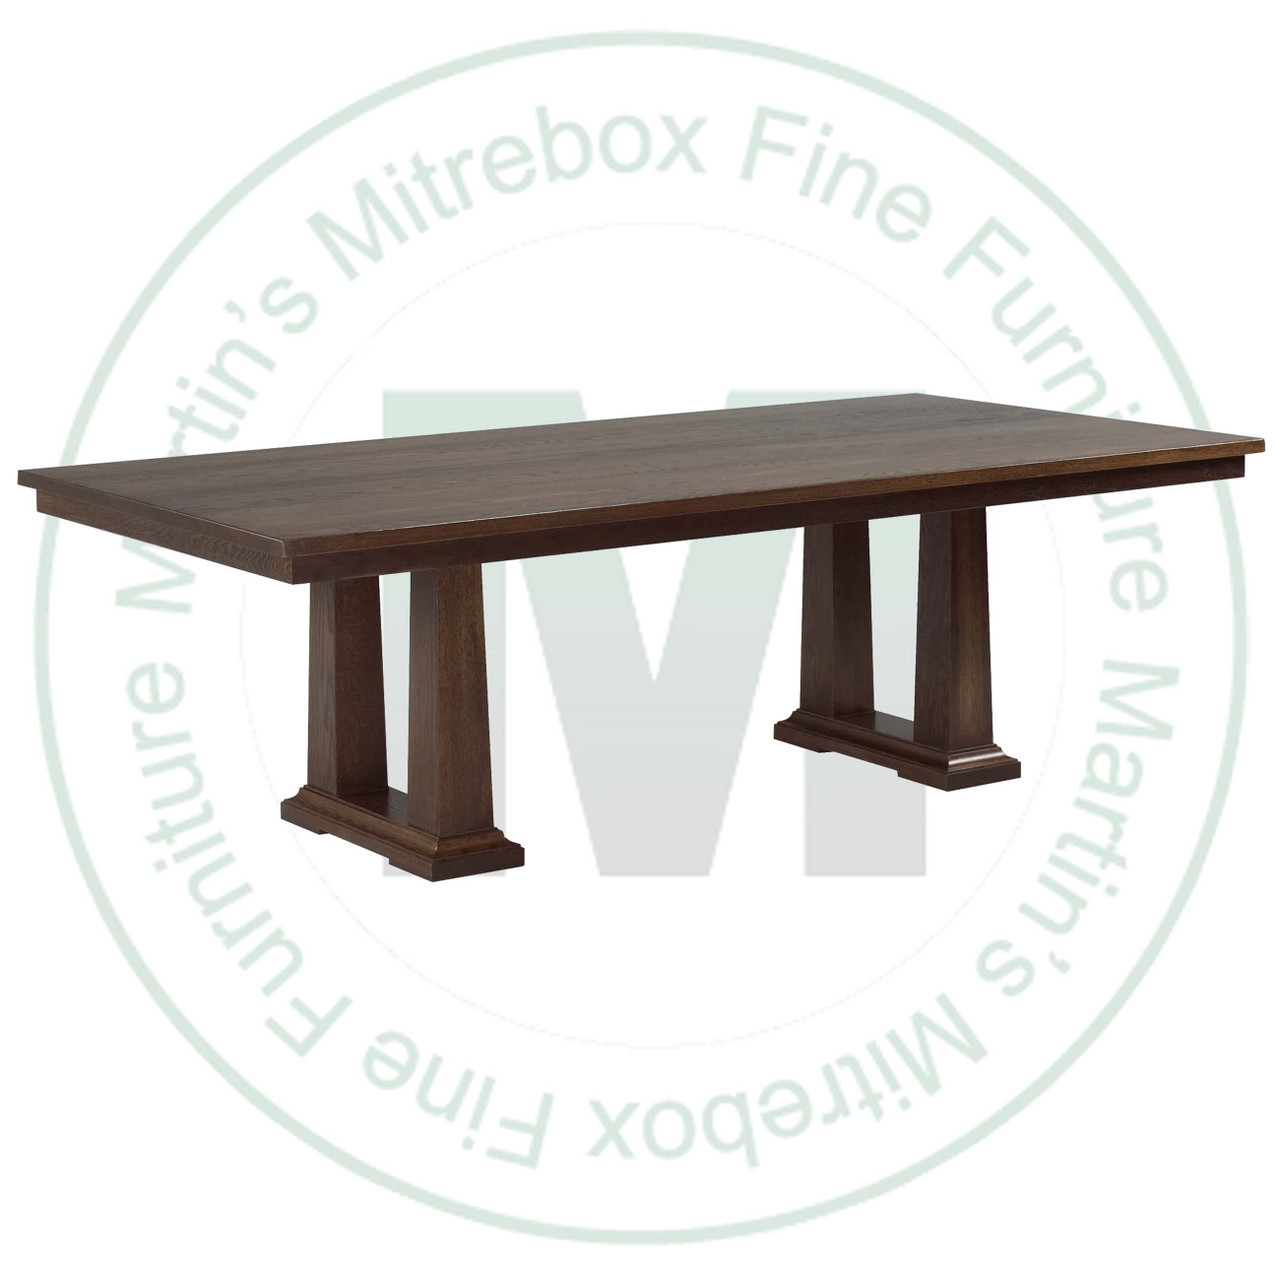 Oak Acropolis Extension Double Pedestal Table 54''D x 72''W x 30''H With 3 - 12'' Leaves Table Has 1.25'' Thick Top